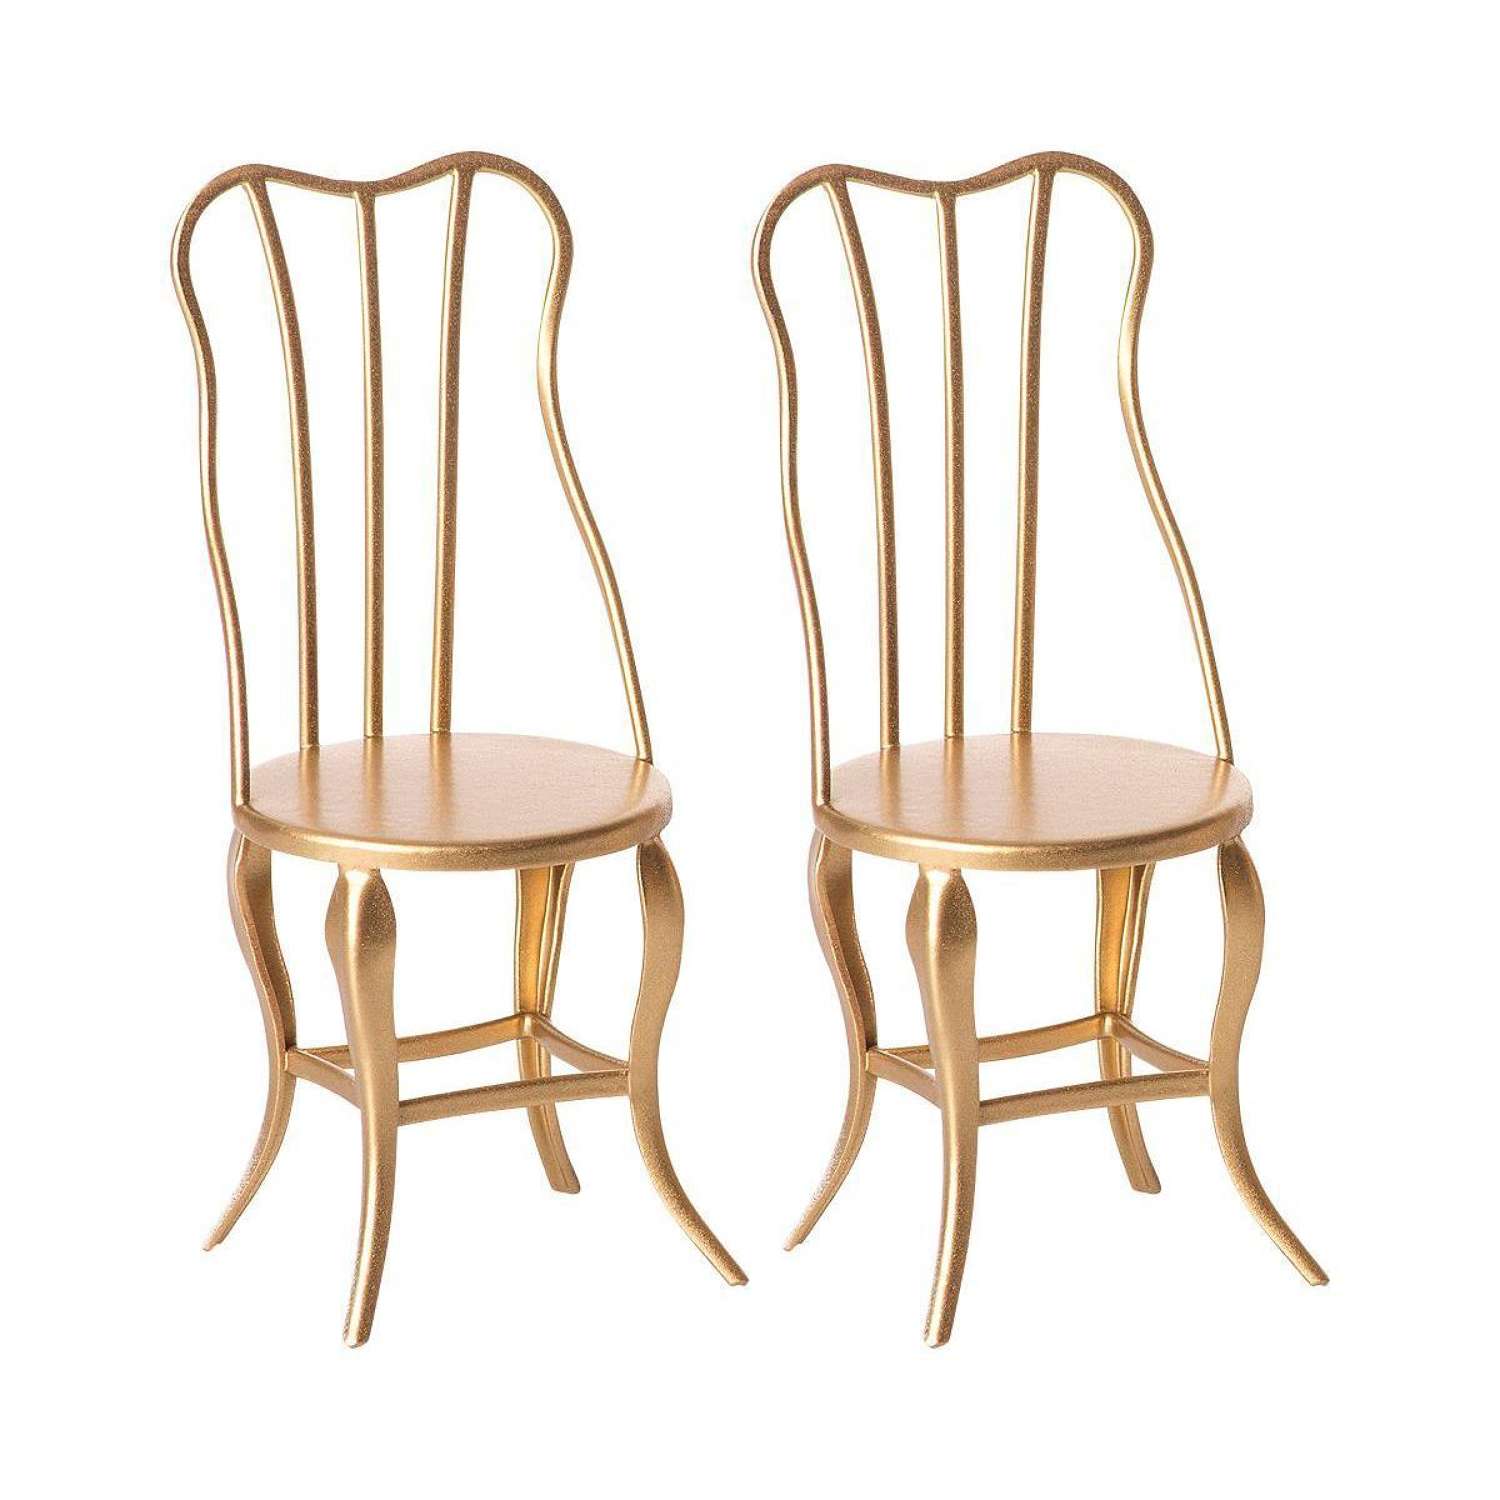 Maileg - Mirco gold chairs x 2 - pair of mirco vintage chairs